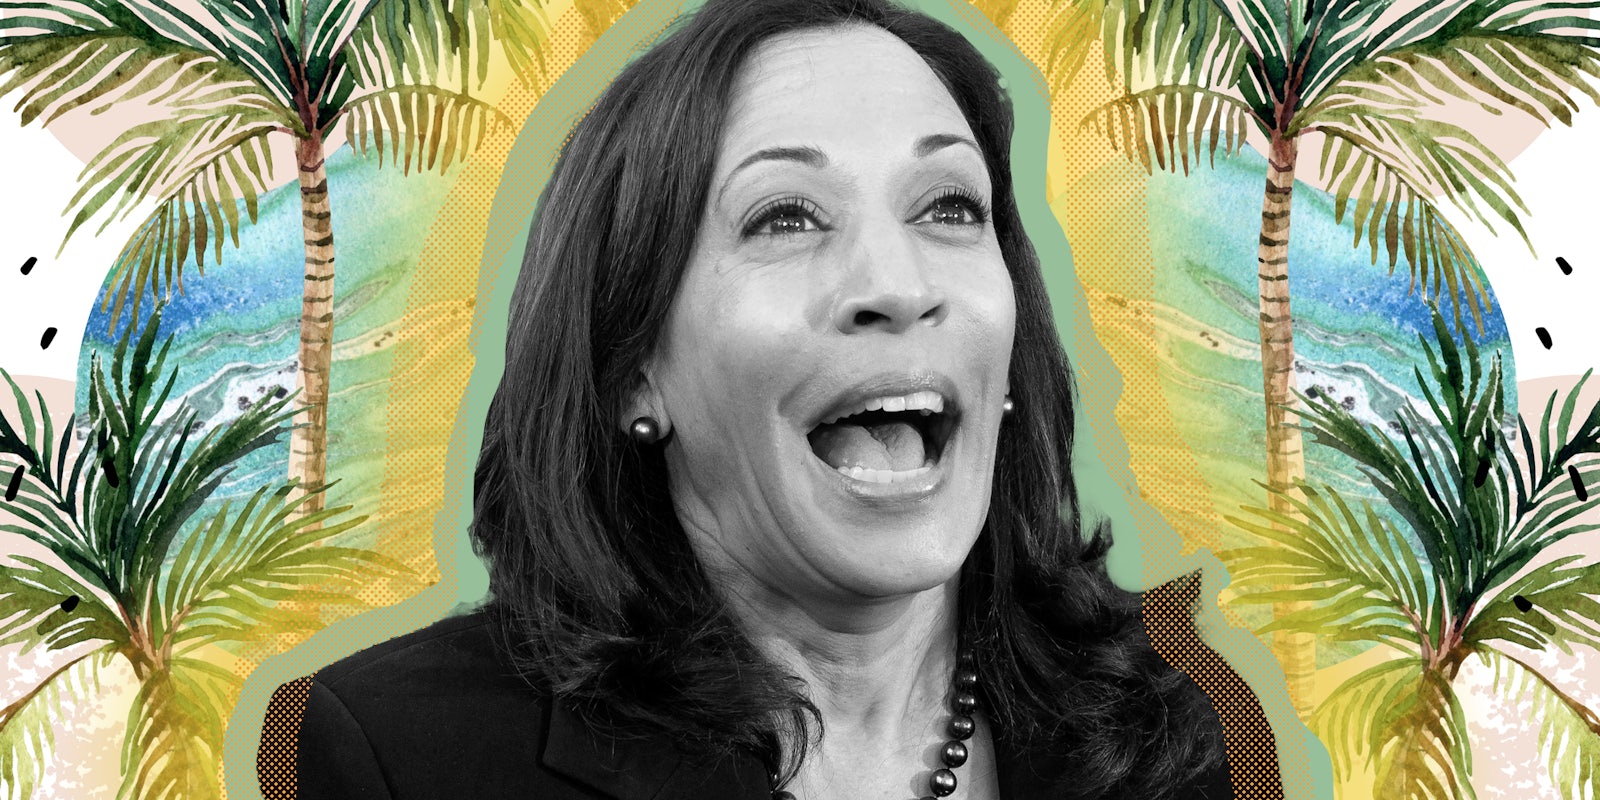 Kamala Harris laughing with palm trees in the background